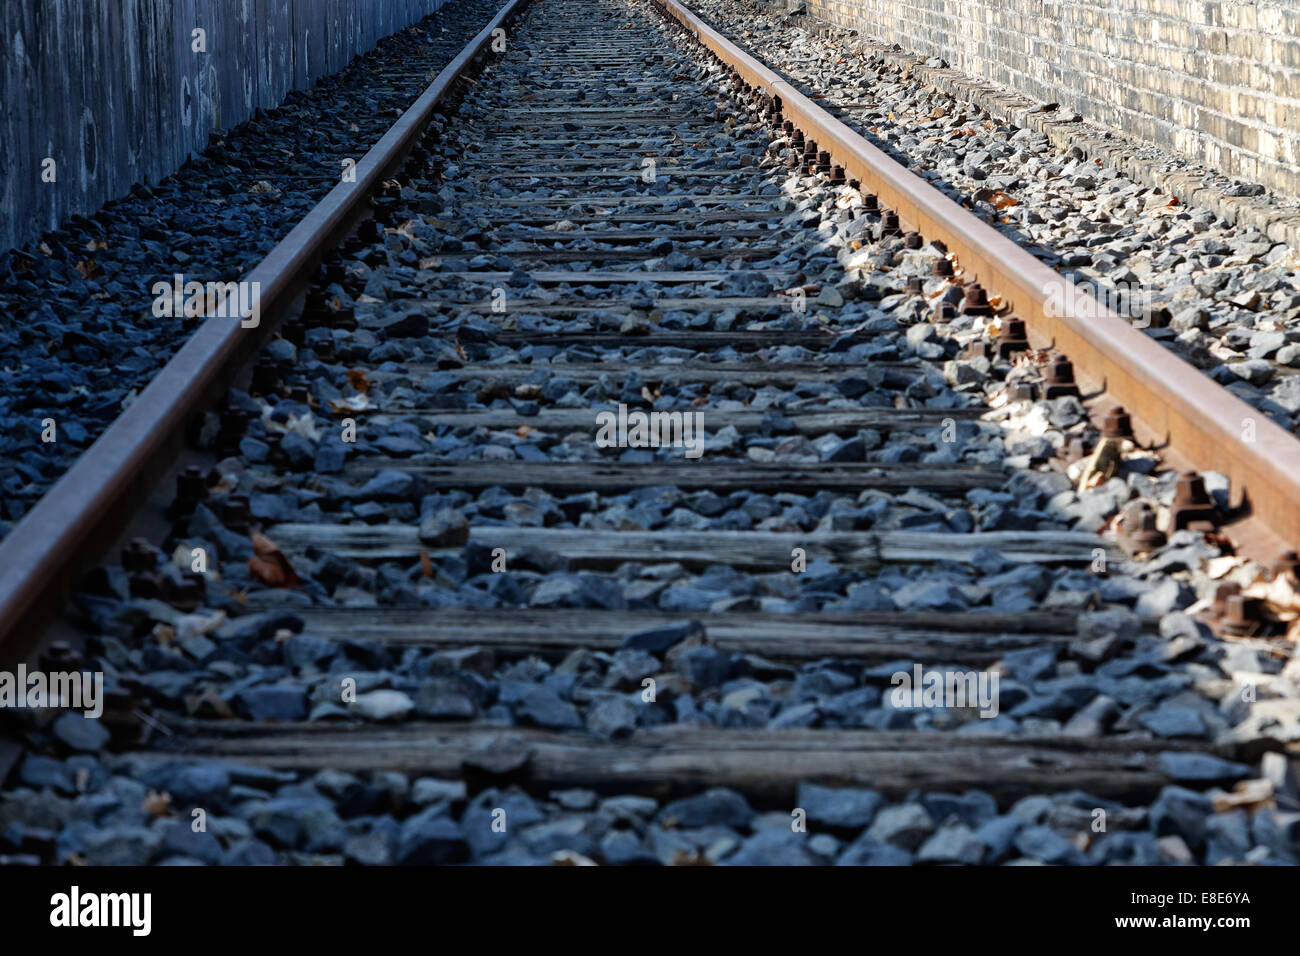 Berlin, Germany, the track bed of the Platform 17 memorial at Grunewald station Stock Photo